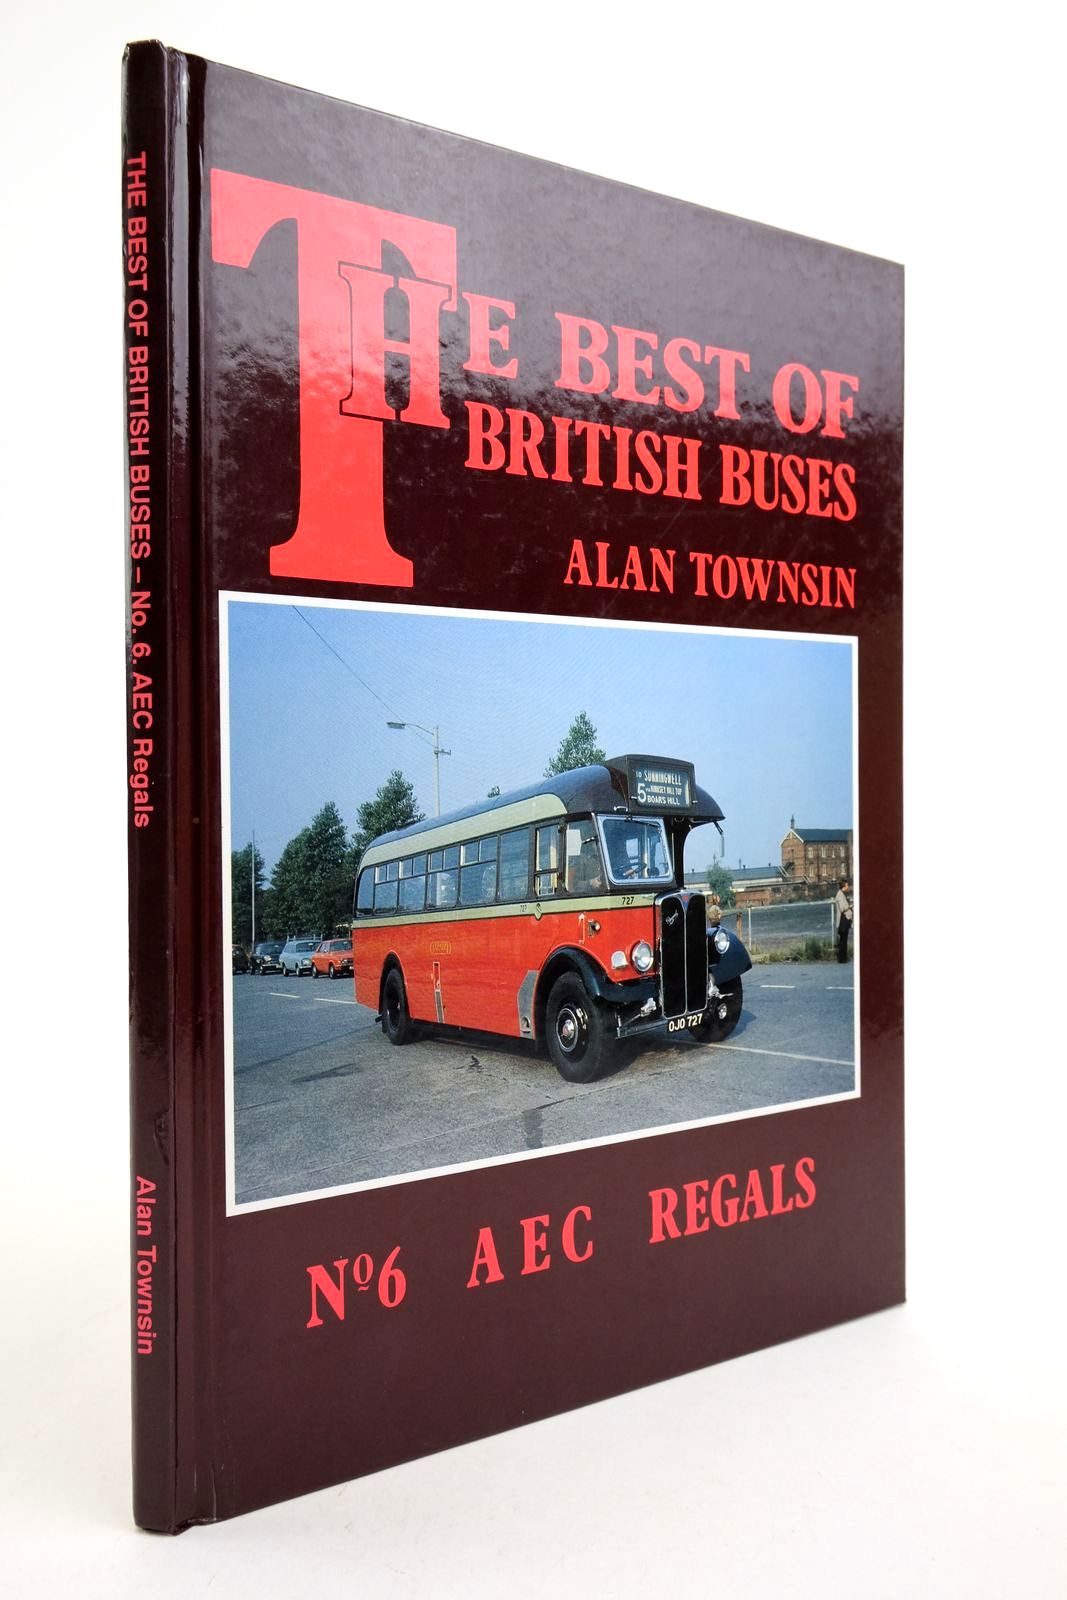 Photo of THE BEST OF BRITISH BUSES No. 6 AEC REGALS written by Townsin, Alan published by Booklaw Railbus (STOCK CODE: 2139658)  for sale by Stella & Rose's Books